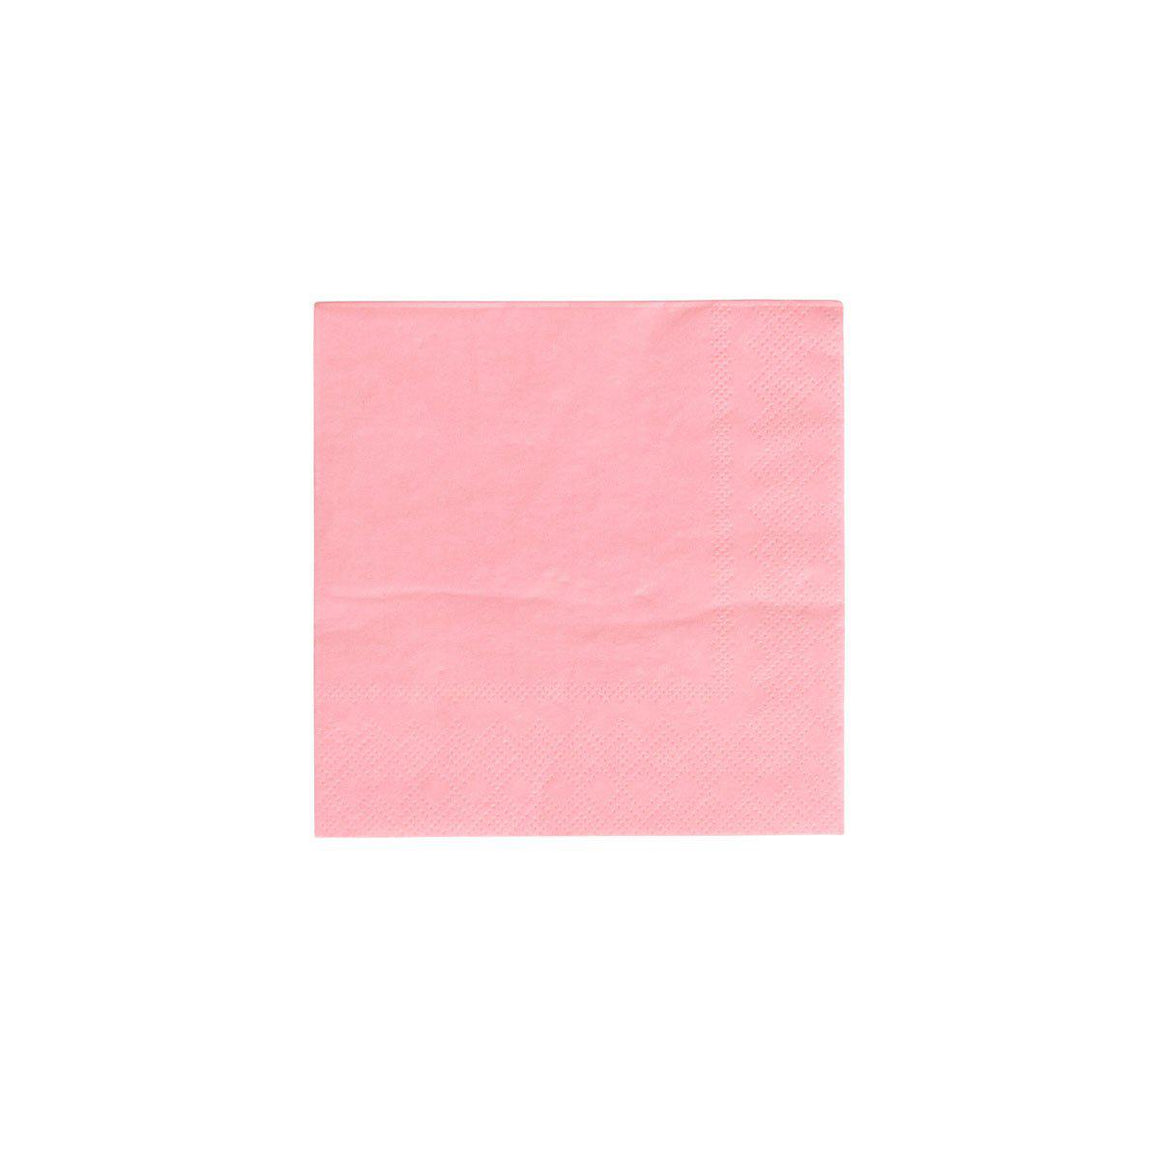 NAPKINS SMALL - PINK ROSE OH HAPPY DAY